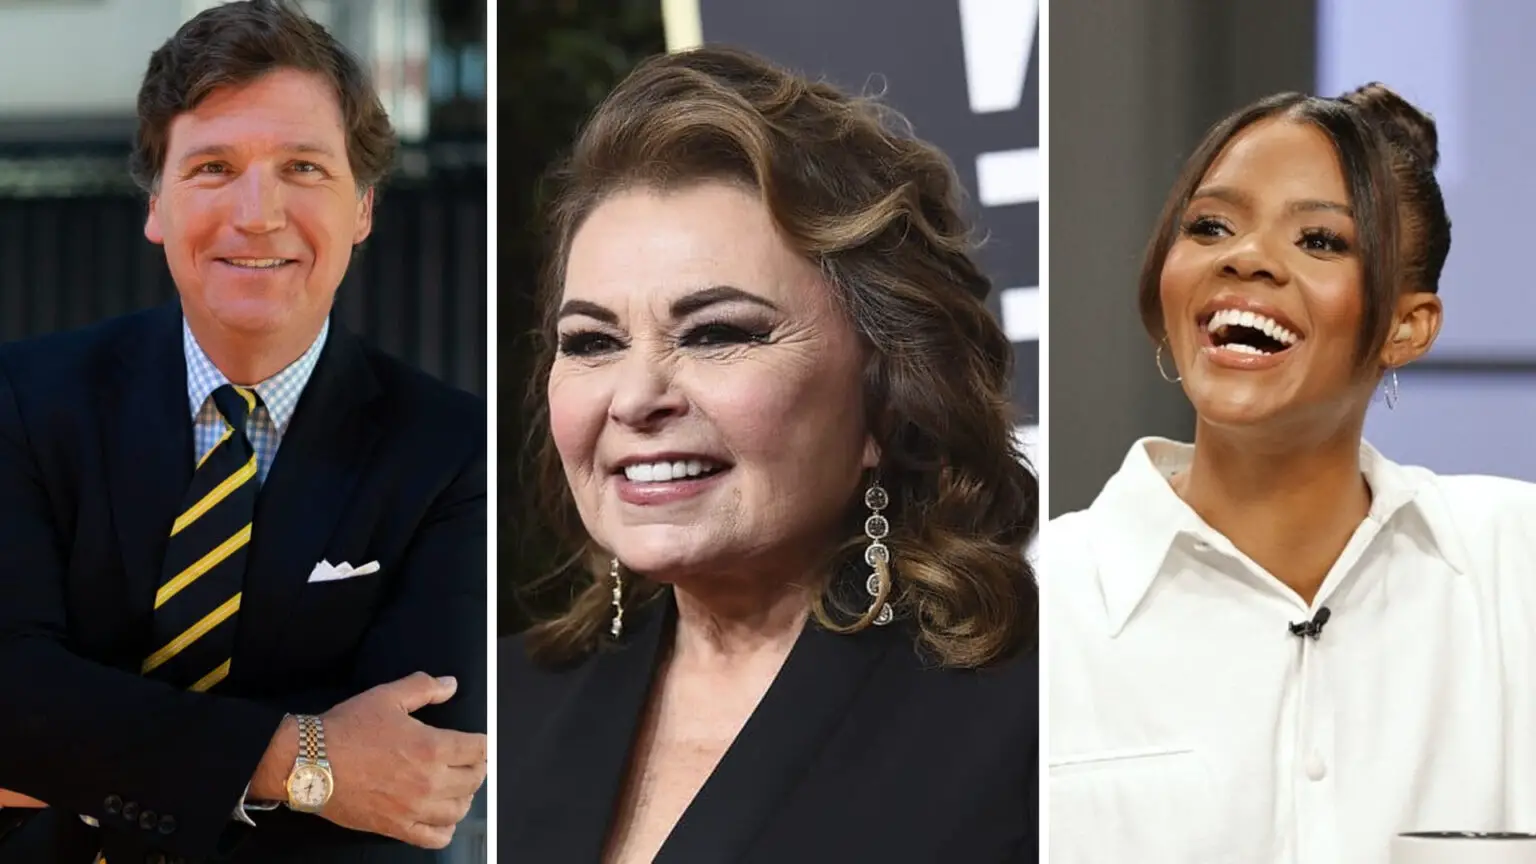 Breaking: Roseanne Barr Joins Candace Owens and Tucker Carlson for New ABC Show, “Together Unstoppable”